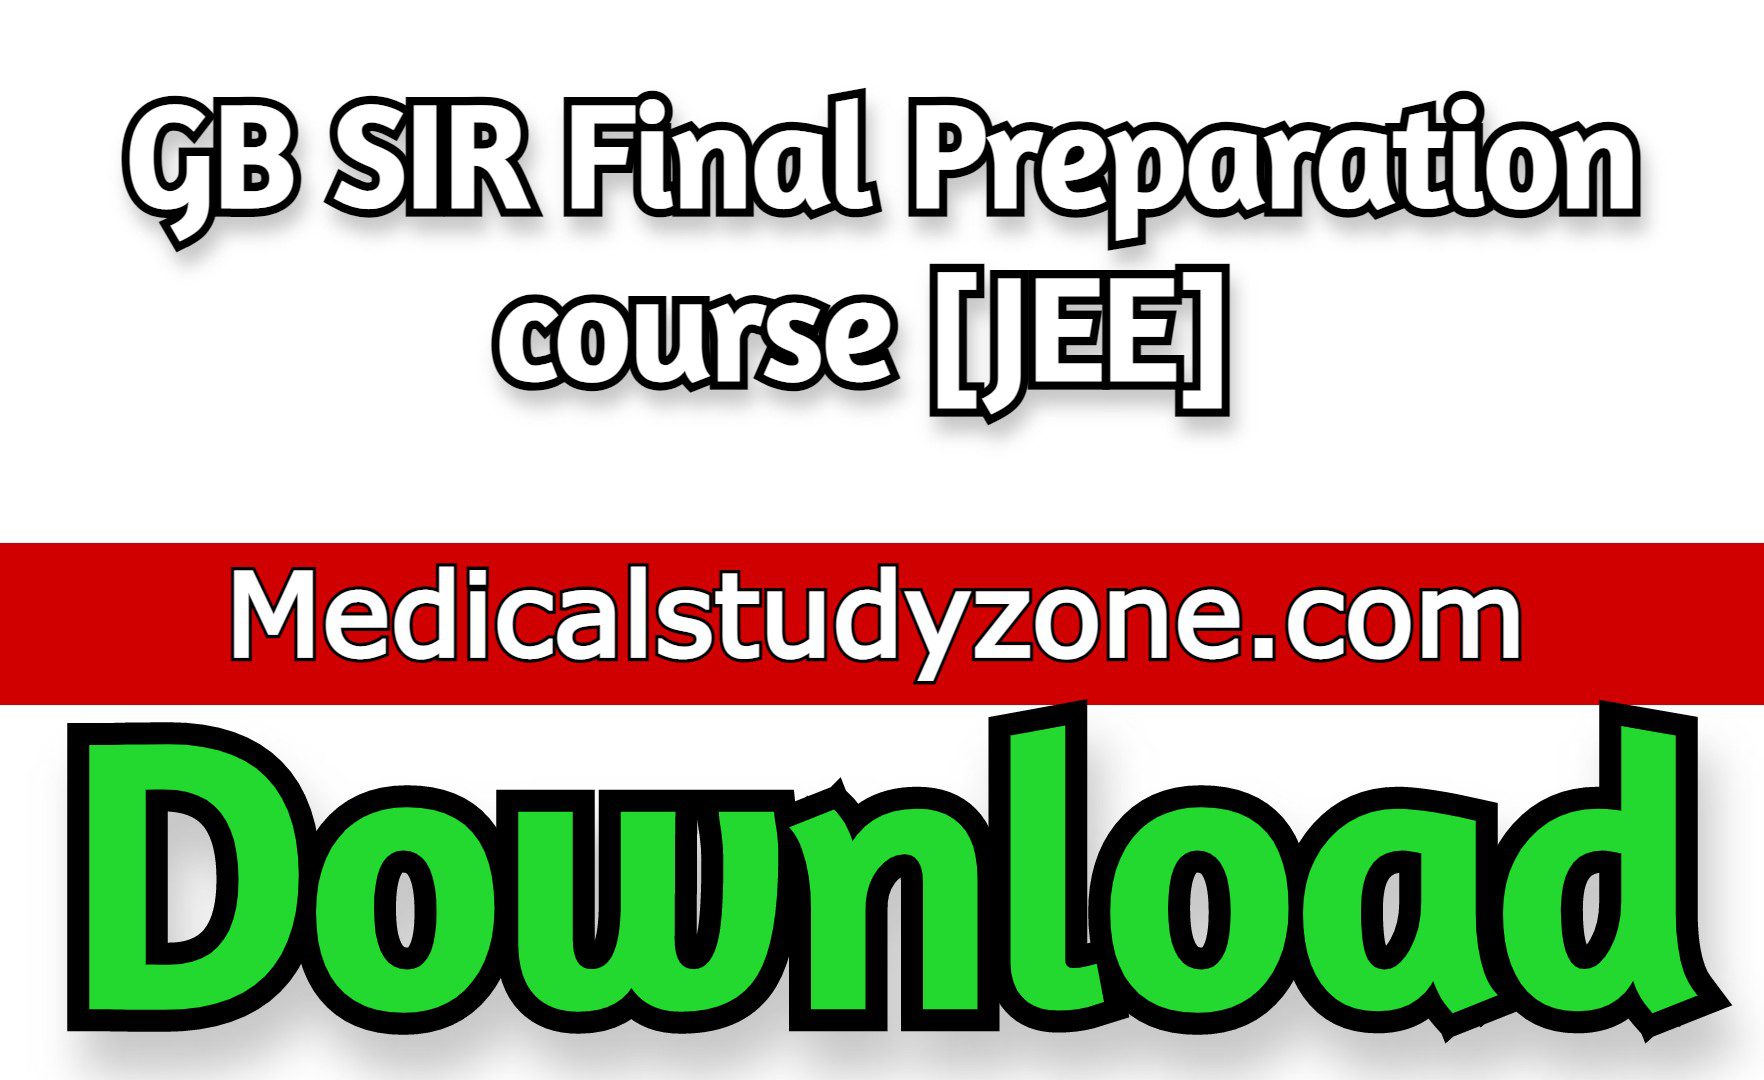 GB SIR Final Preparation course [JEE] Free Download